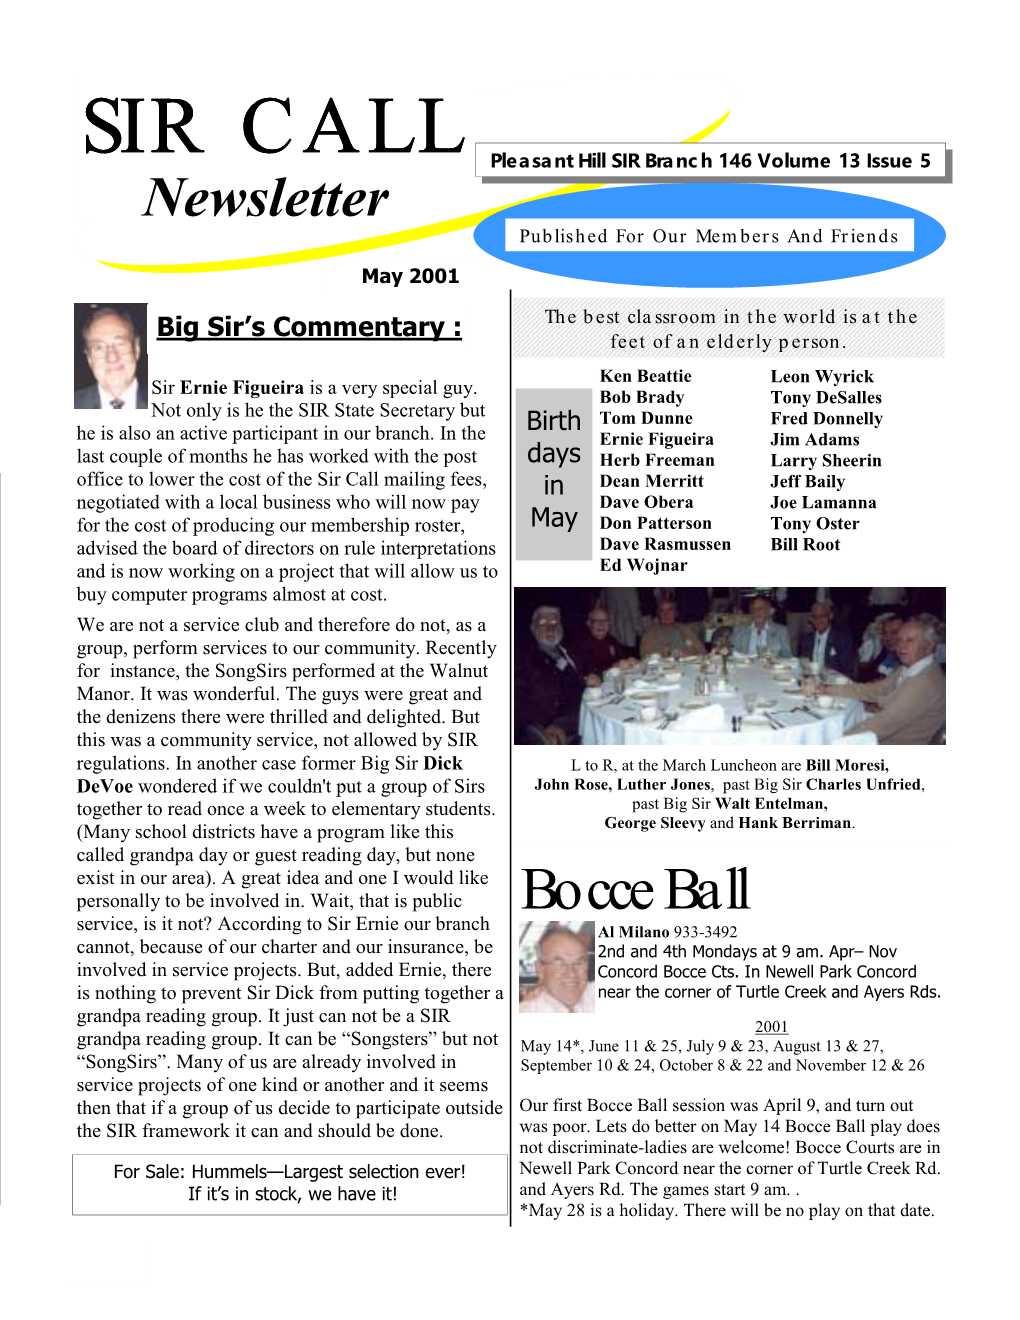 SIR CALL Pleasant Hill SIR Branch 146 Volume 13 Issue 5 Newsletter Published for Our Members and Friends